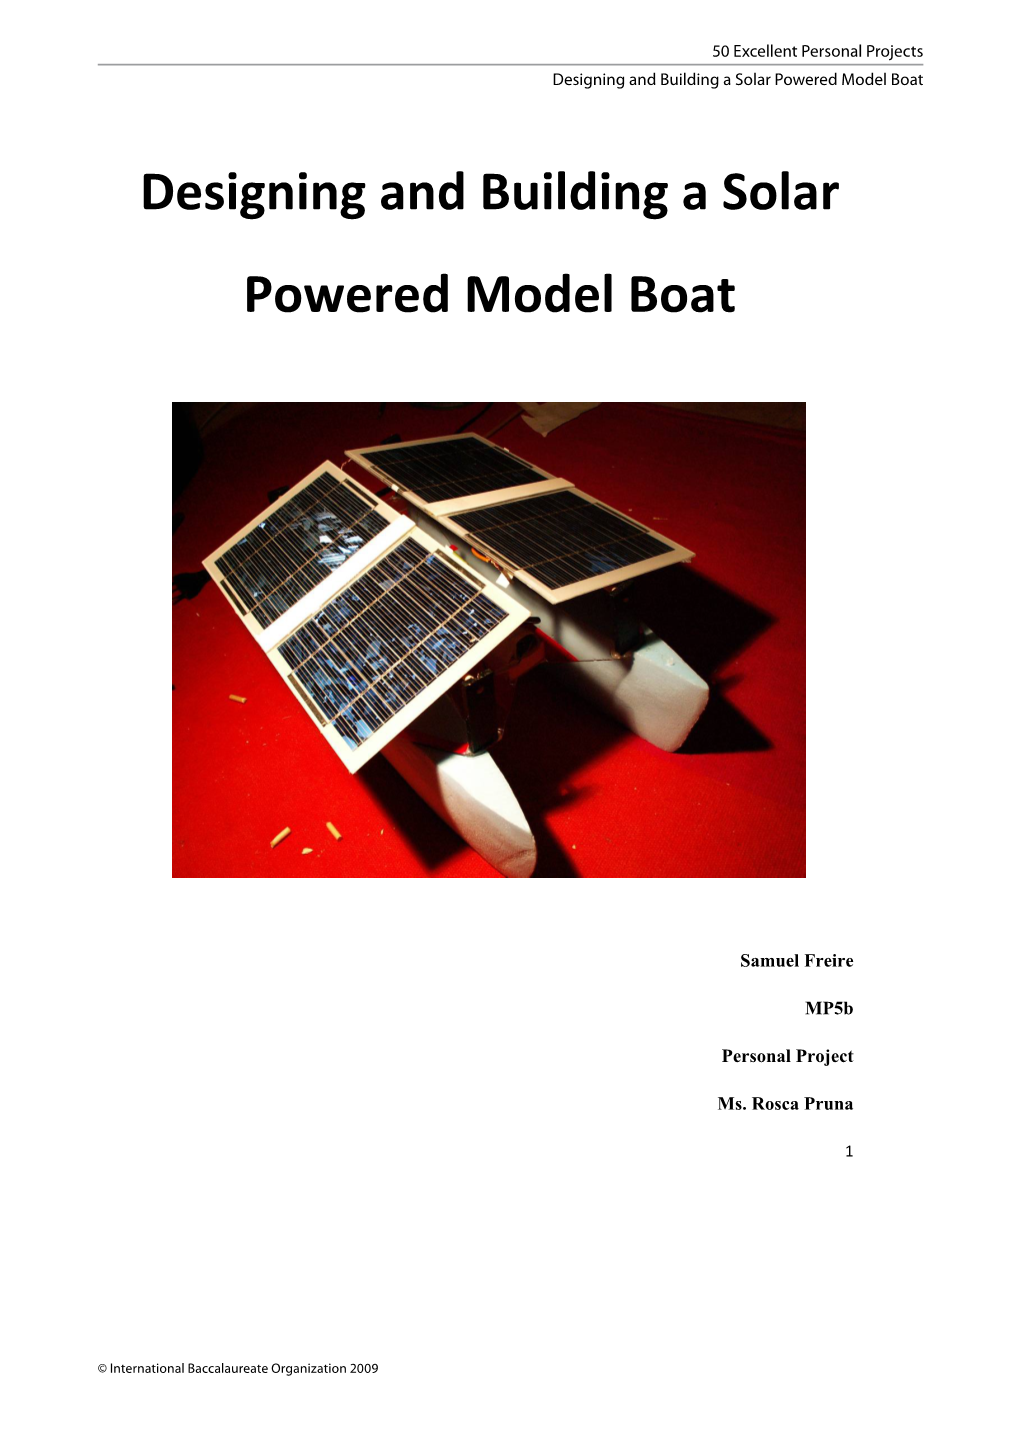 Designing and Building a Solar Powered Model Boat